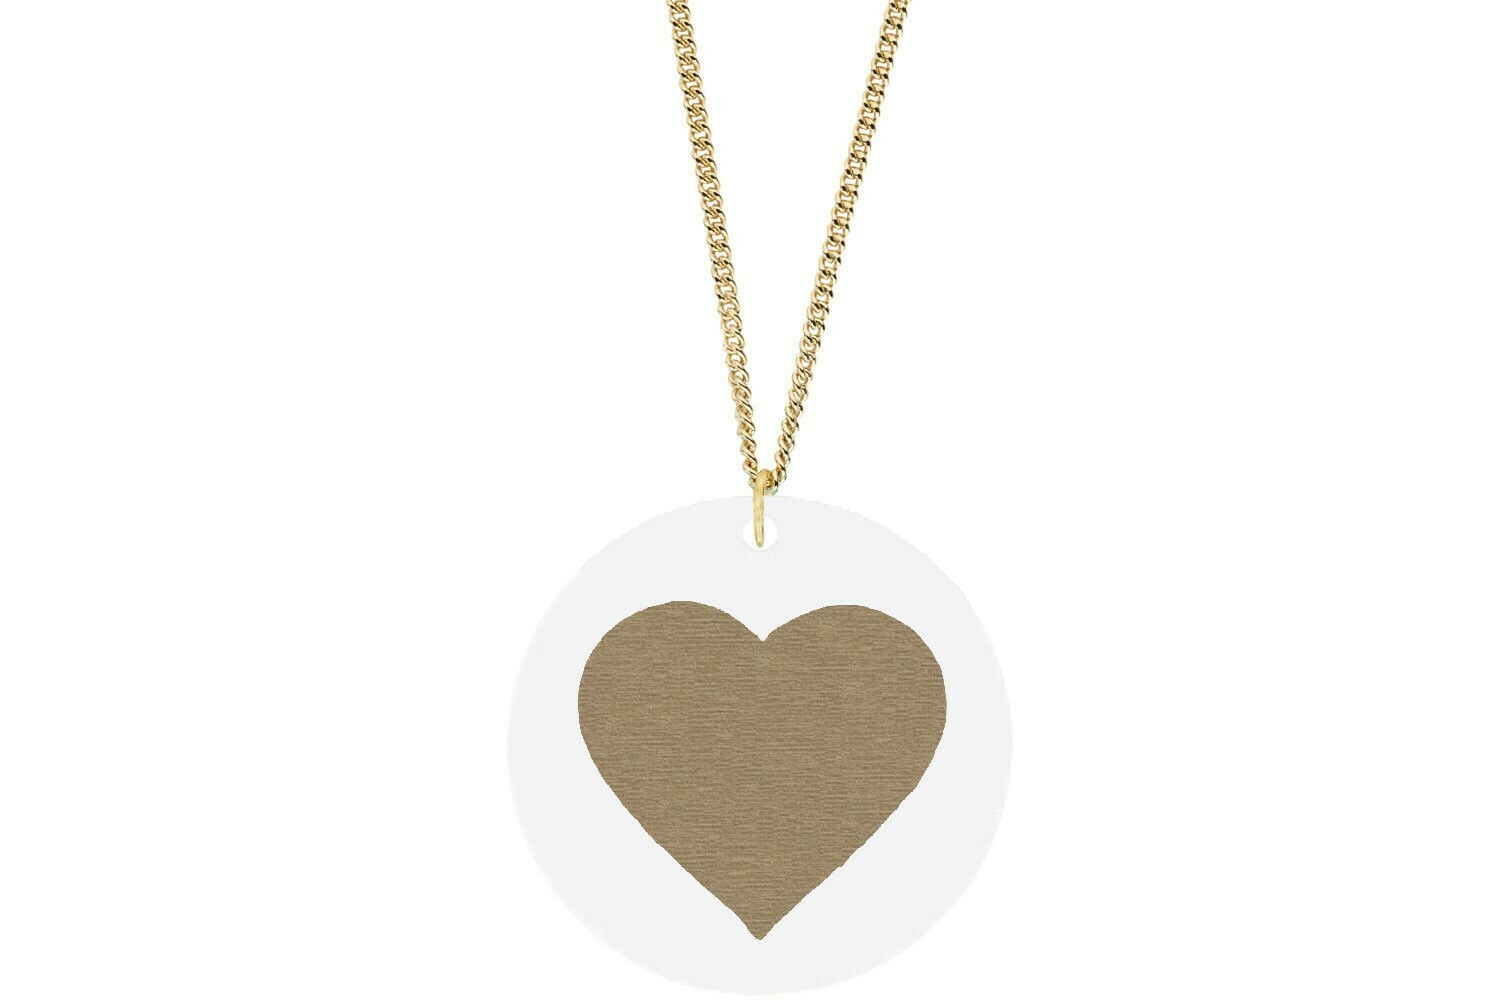 Heart Pendant Subtle Style Refined with Paint on Chain Necklace